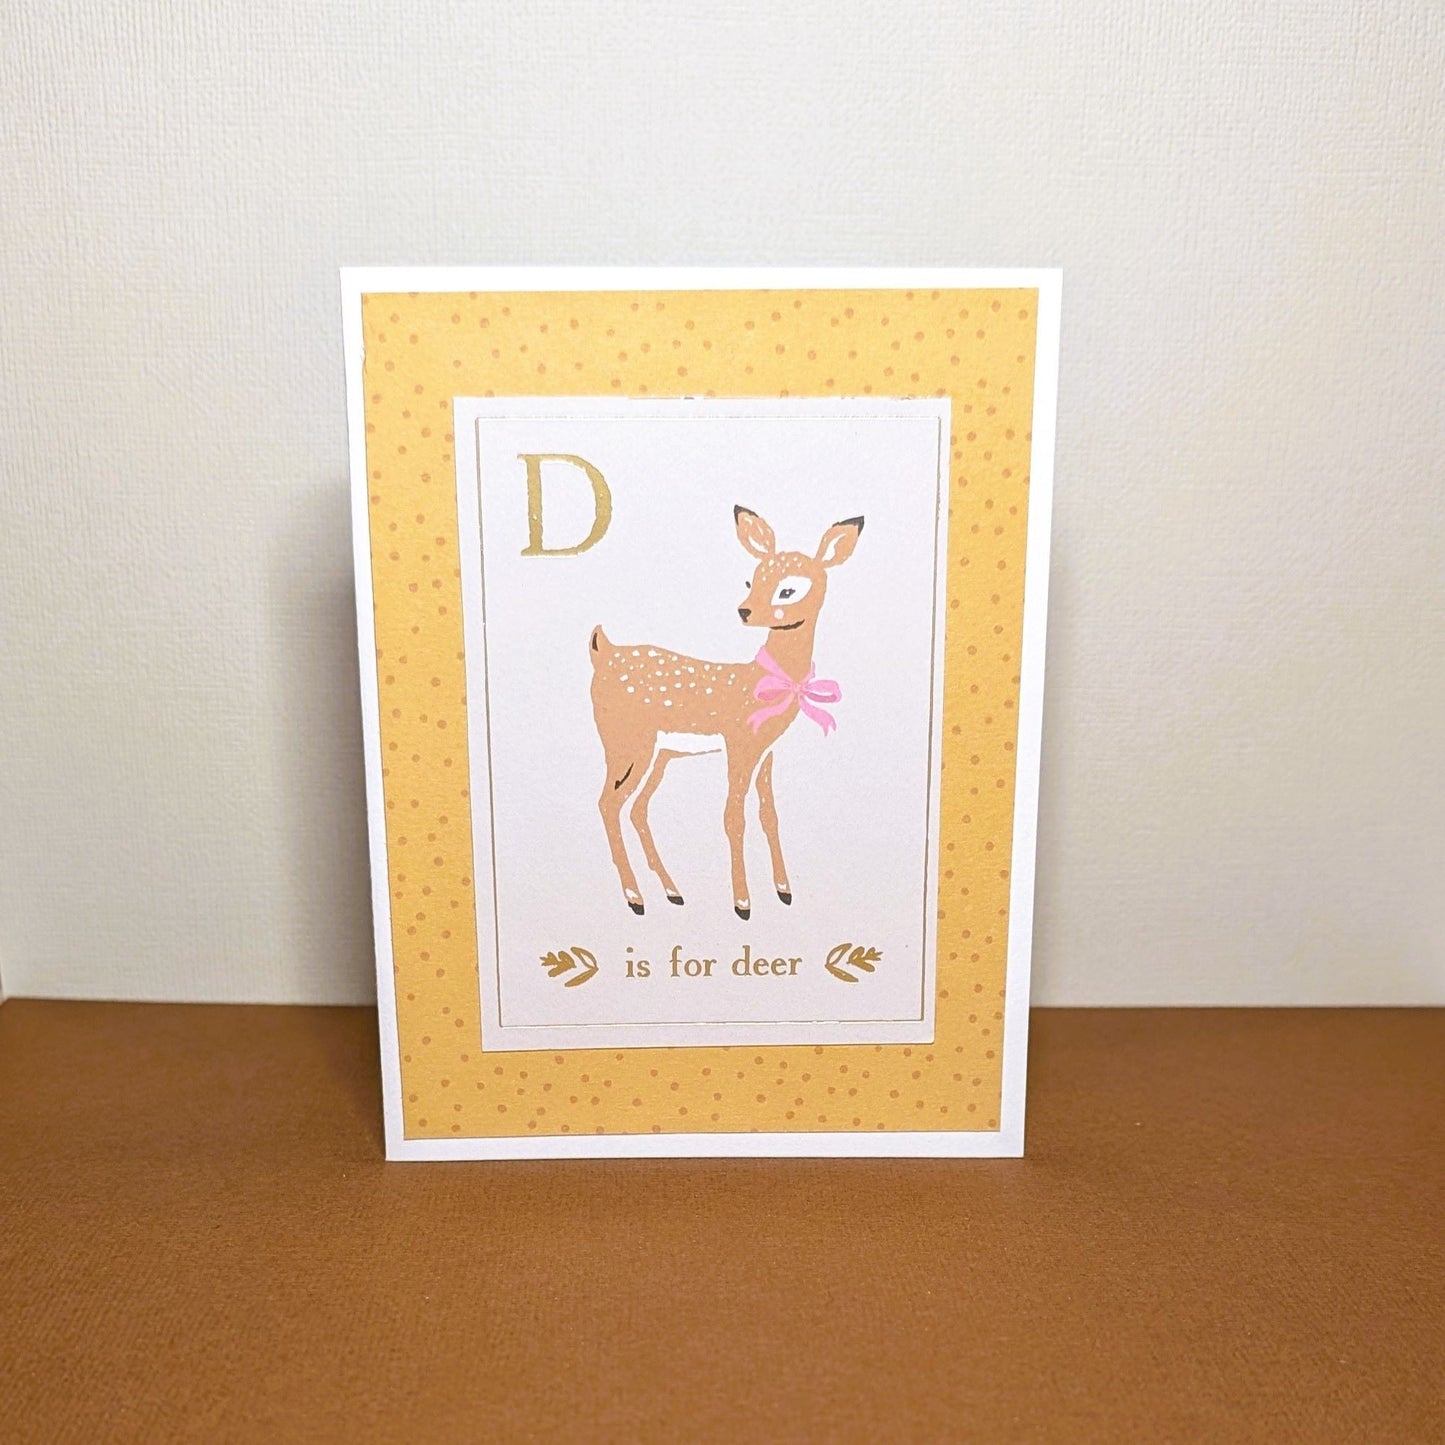 D is for Deer- Say Hello Collection - Handmade Greeting Card - 31 Rubies Designs